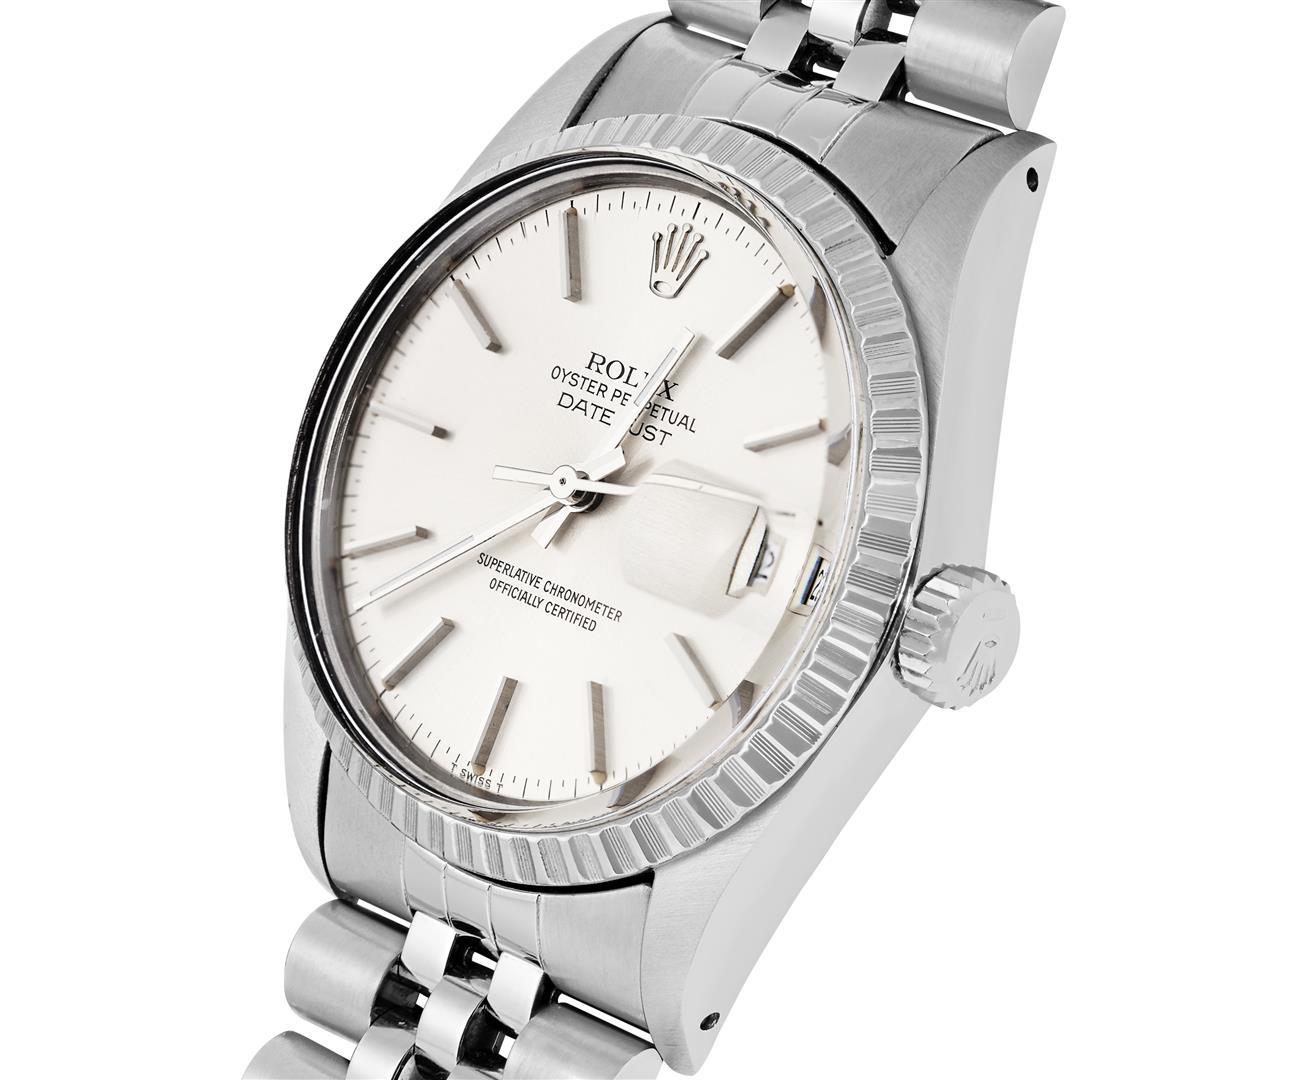 Rolex Mens 36MM Stainless Steel Silver Index Dial Datejust With Rolex Box